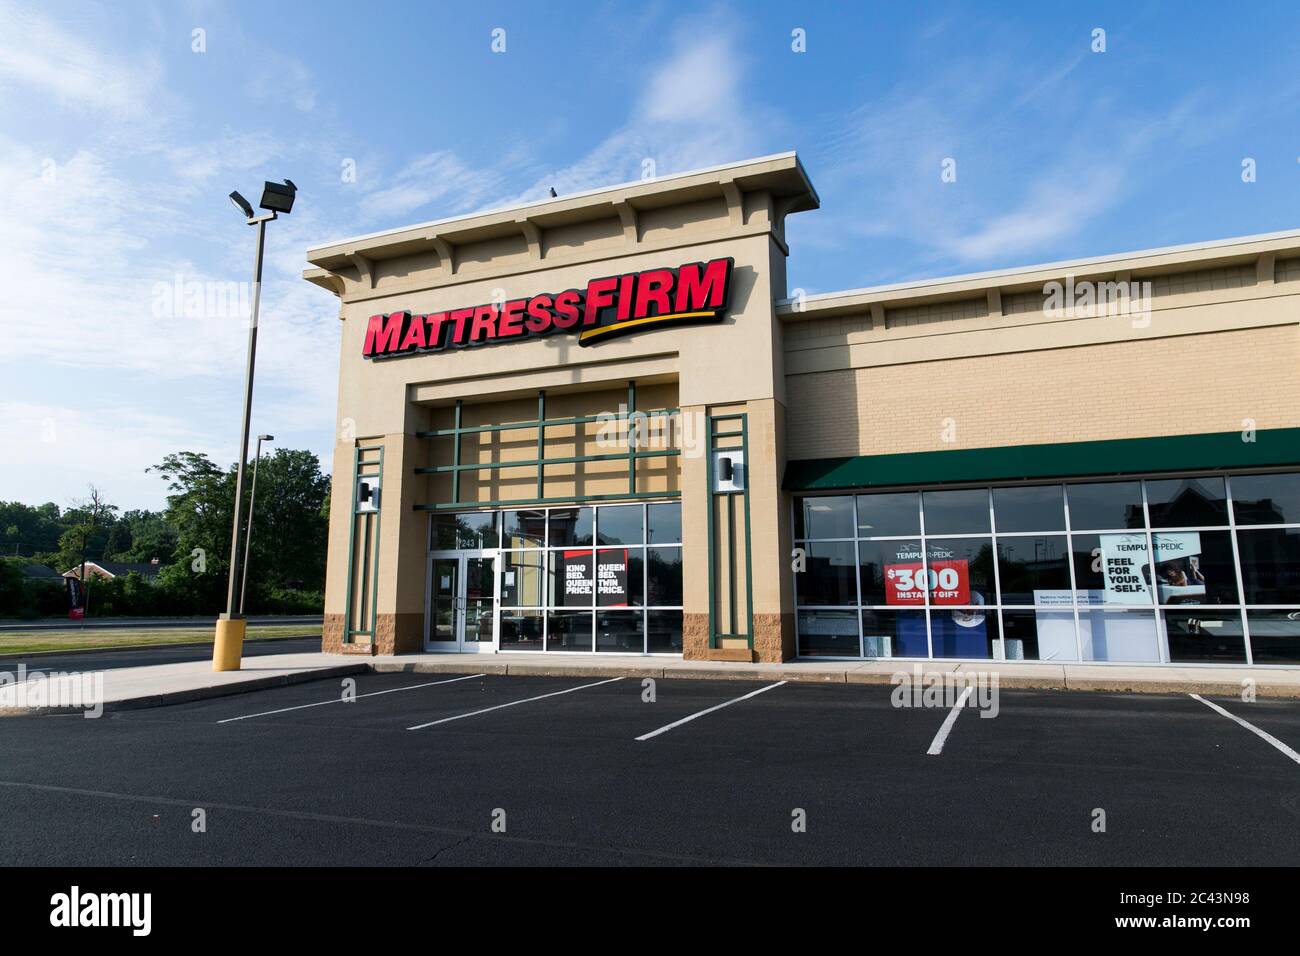 A logo sign outside of a Mattress Firm retail store location in Hagerstown, Maryland on June 10, 2020. Stock Photo